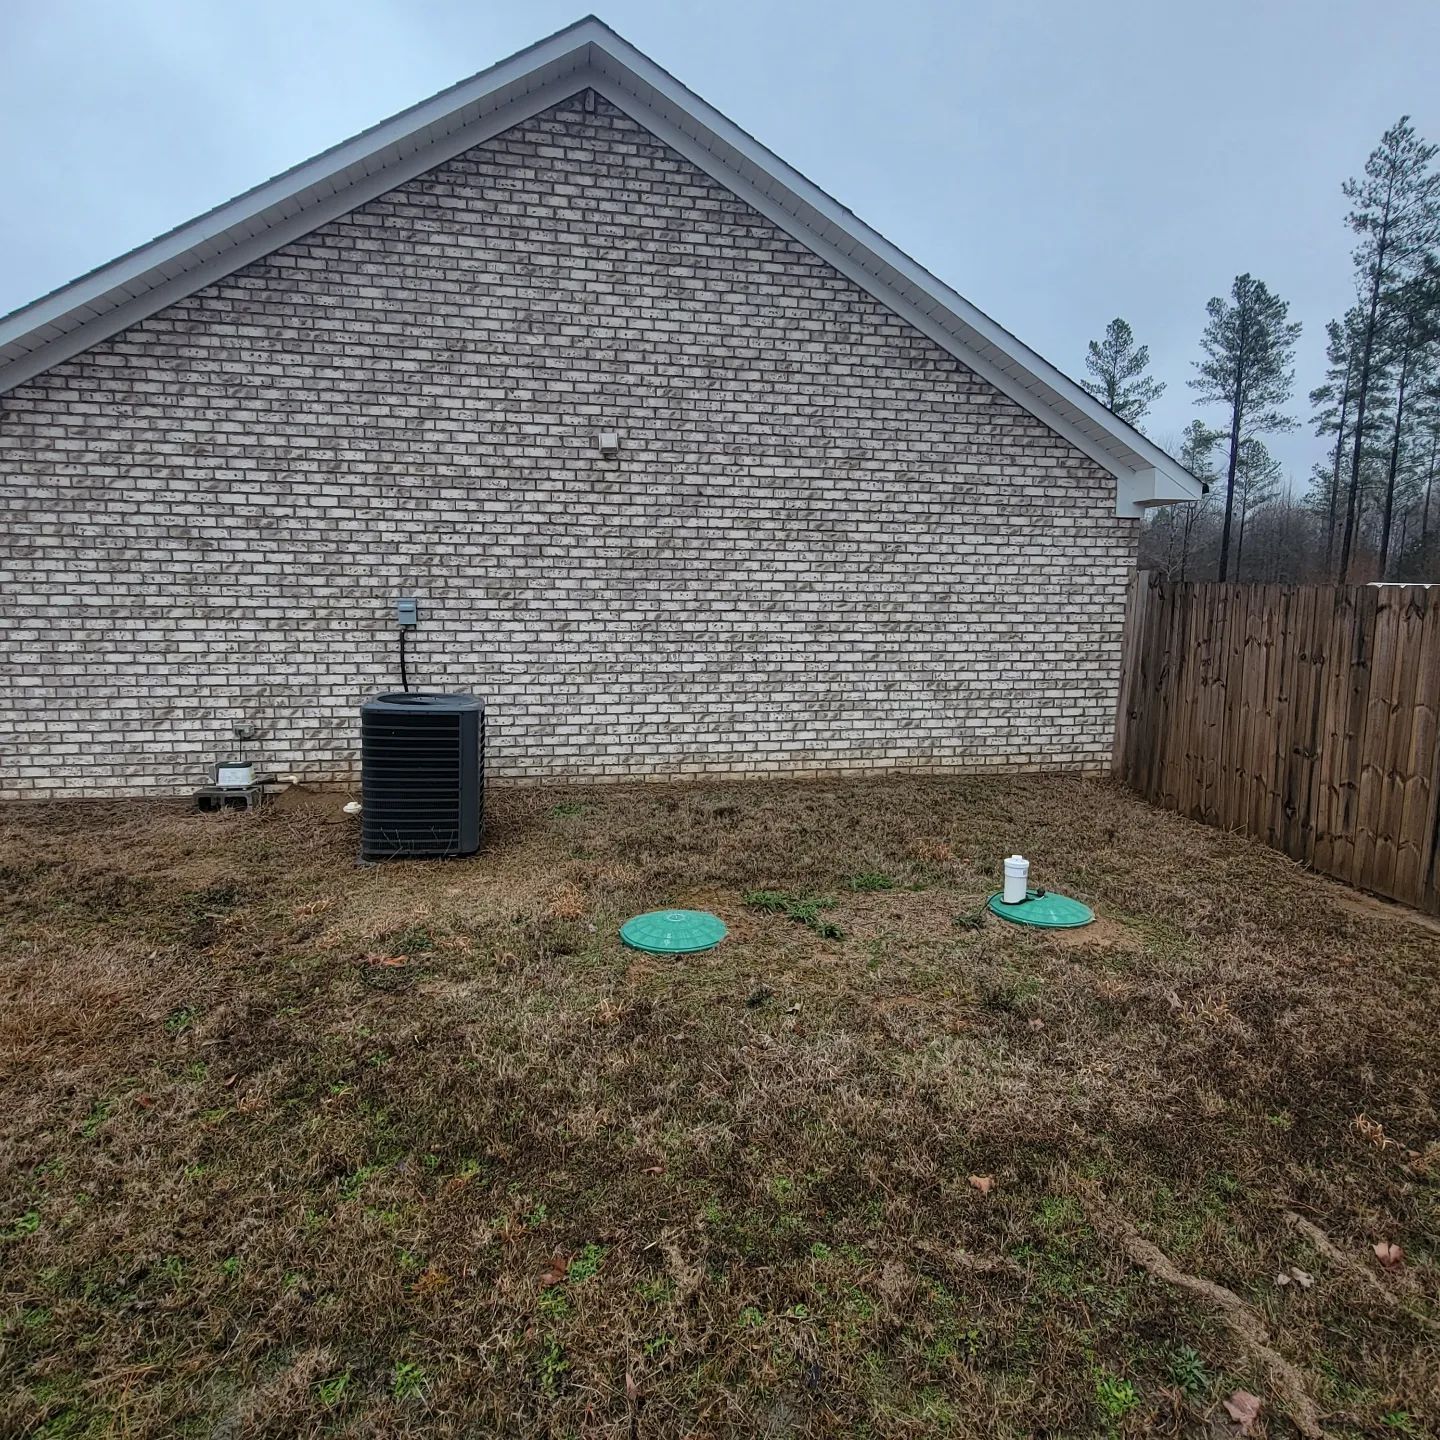 Expert septic system care
